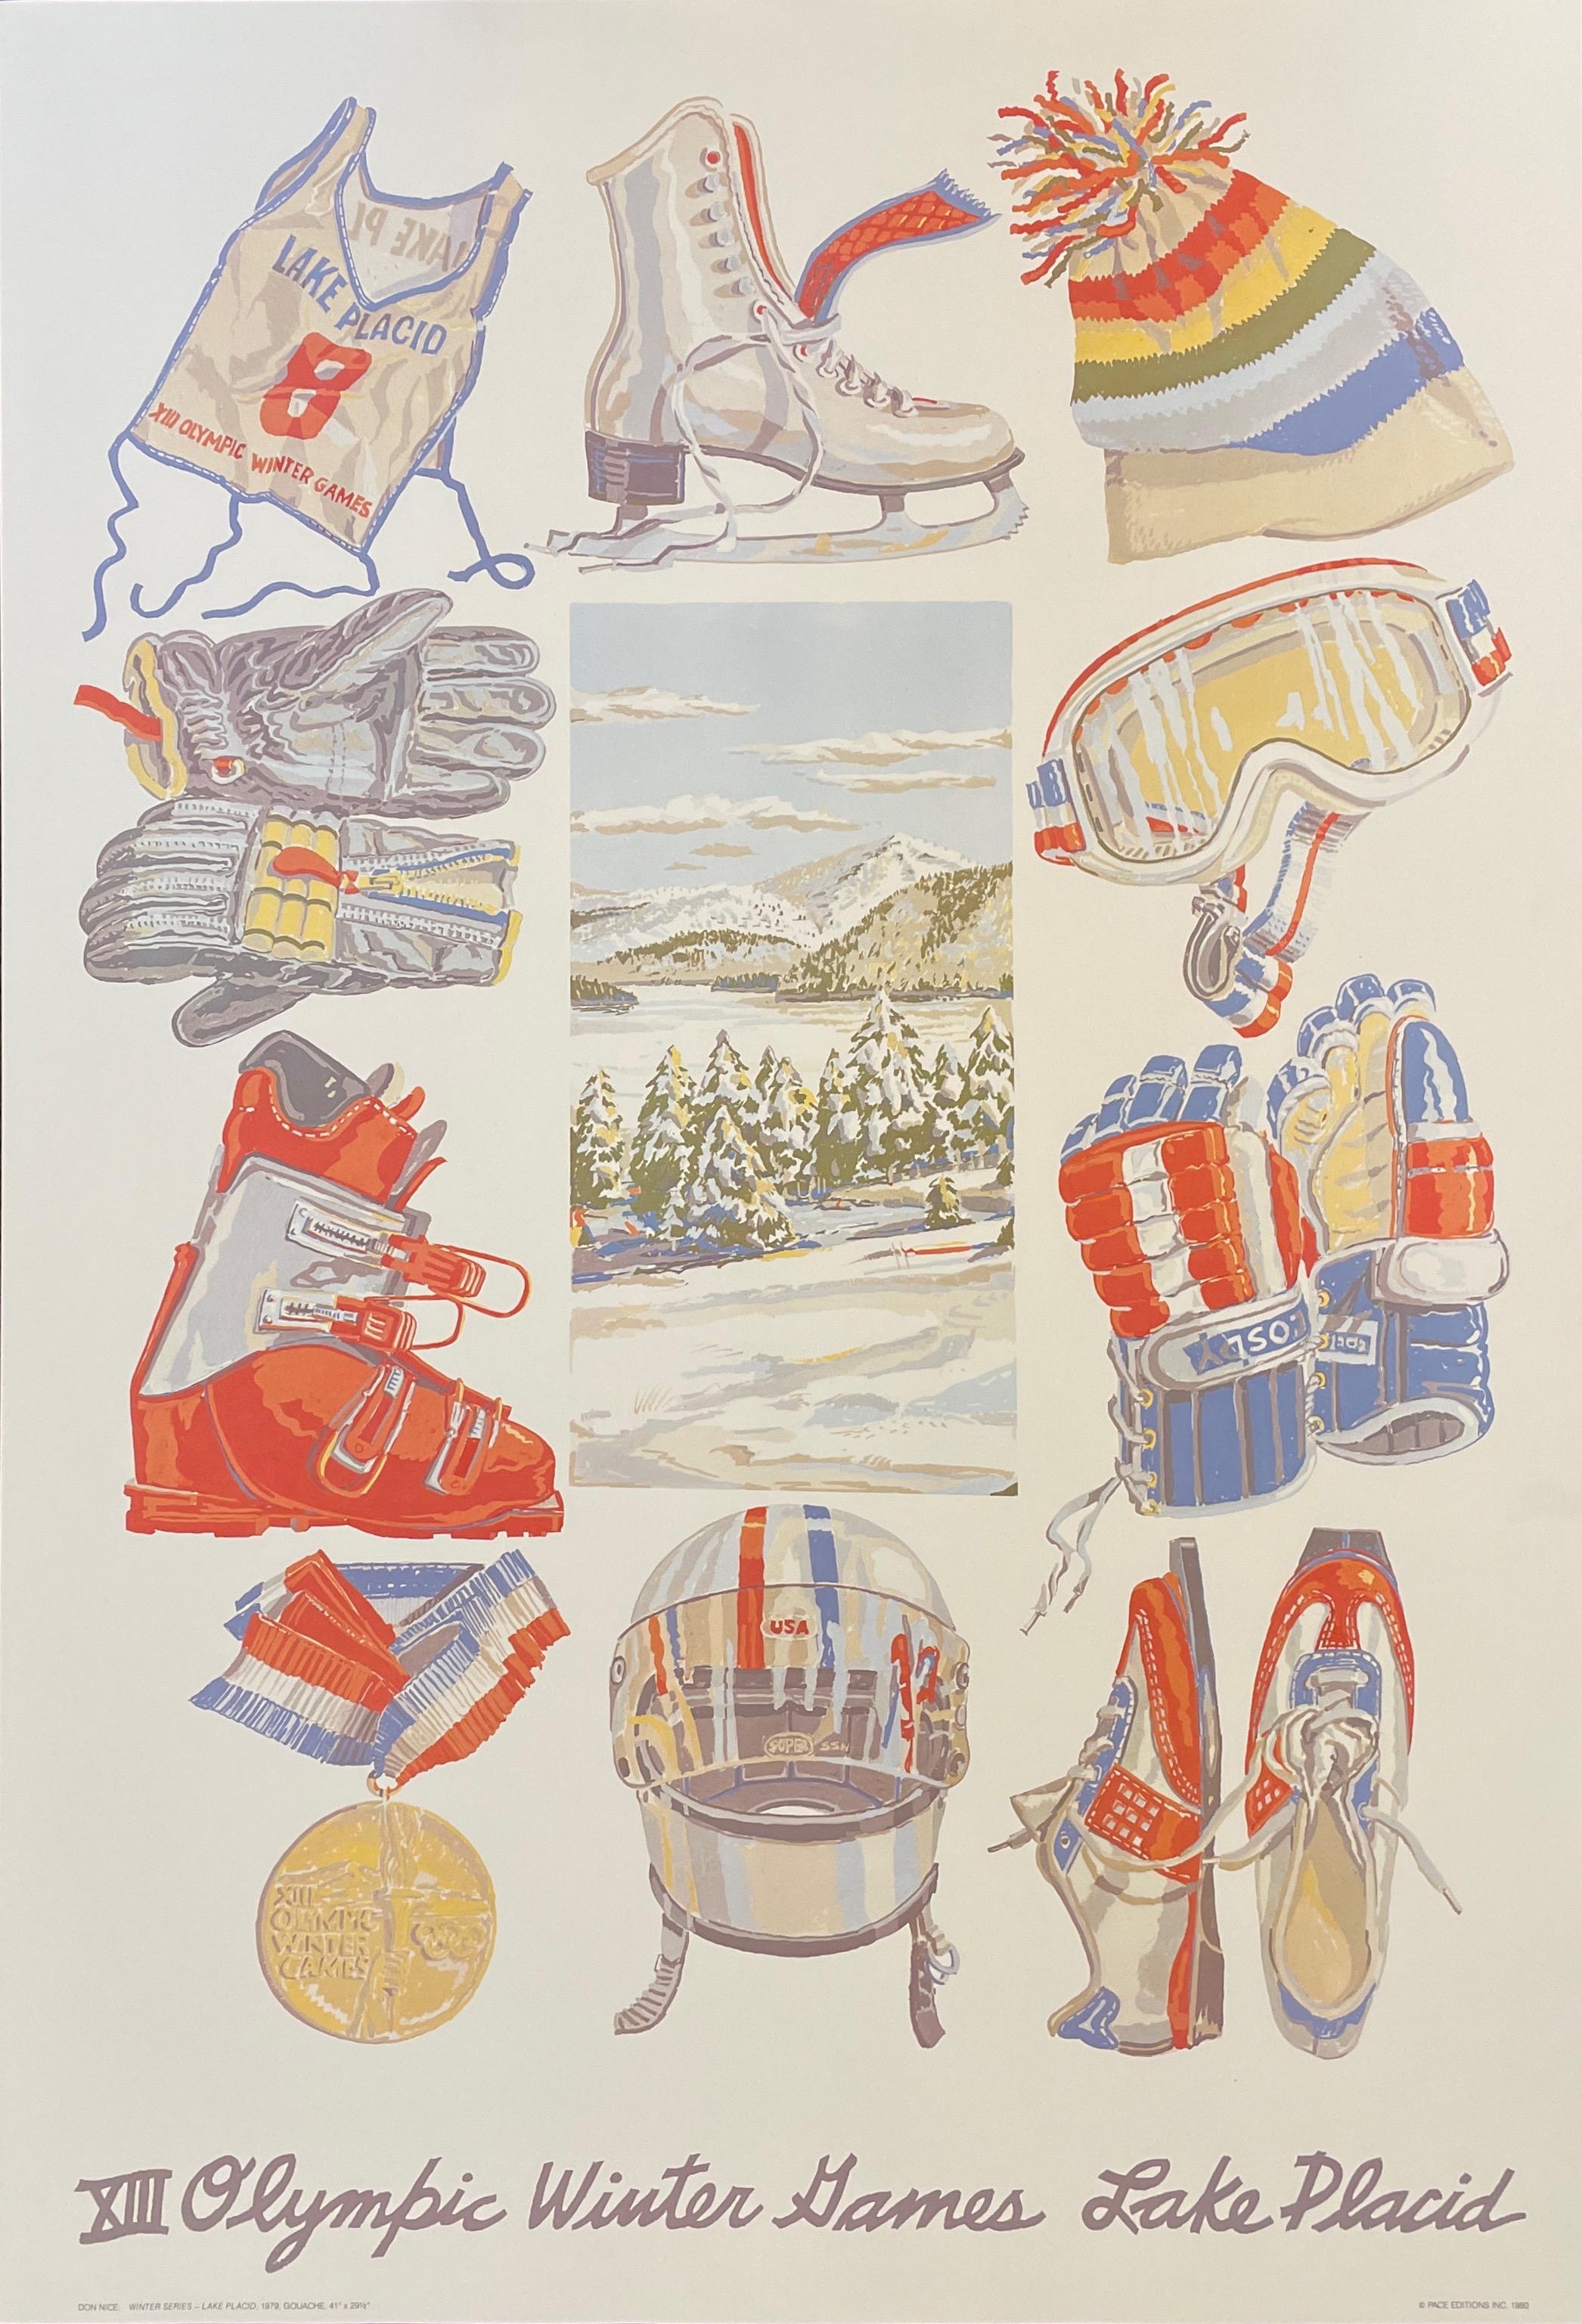 XIII Olympic Winter Games Lake Placid - Print by Don Nice